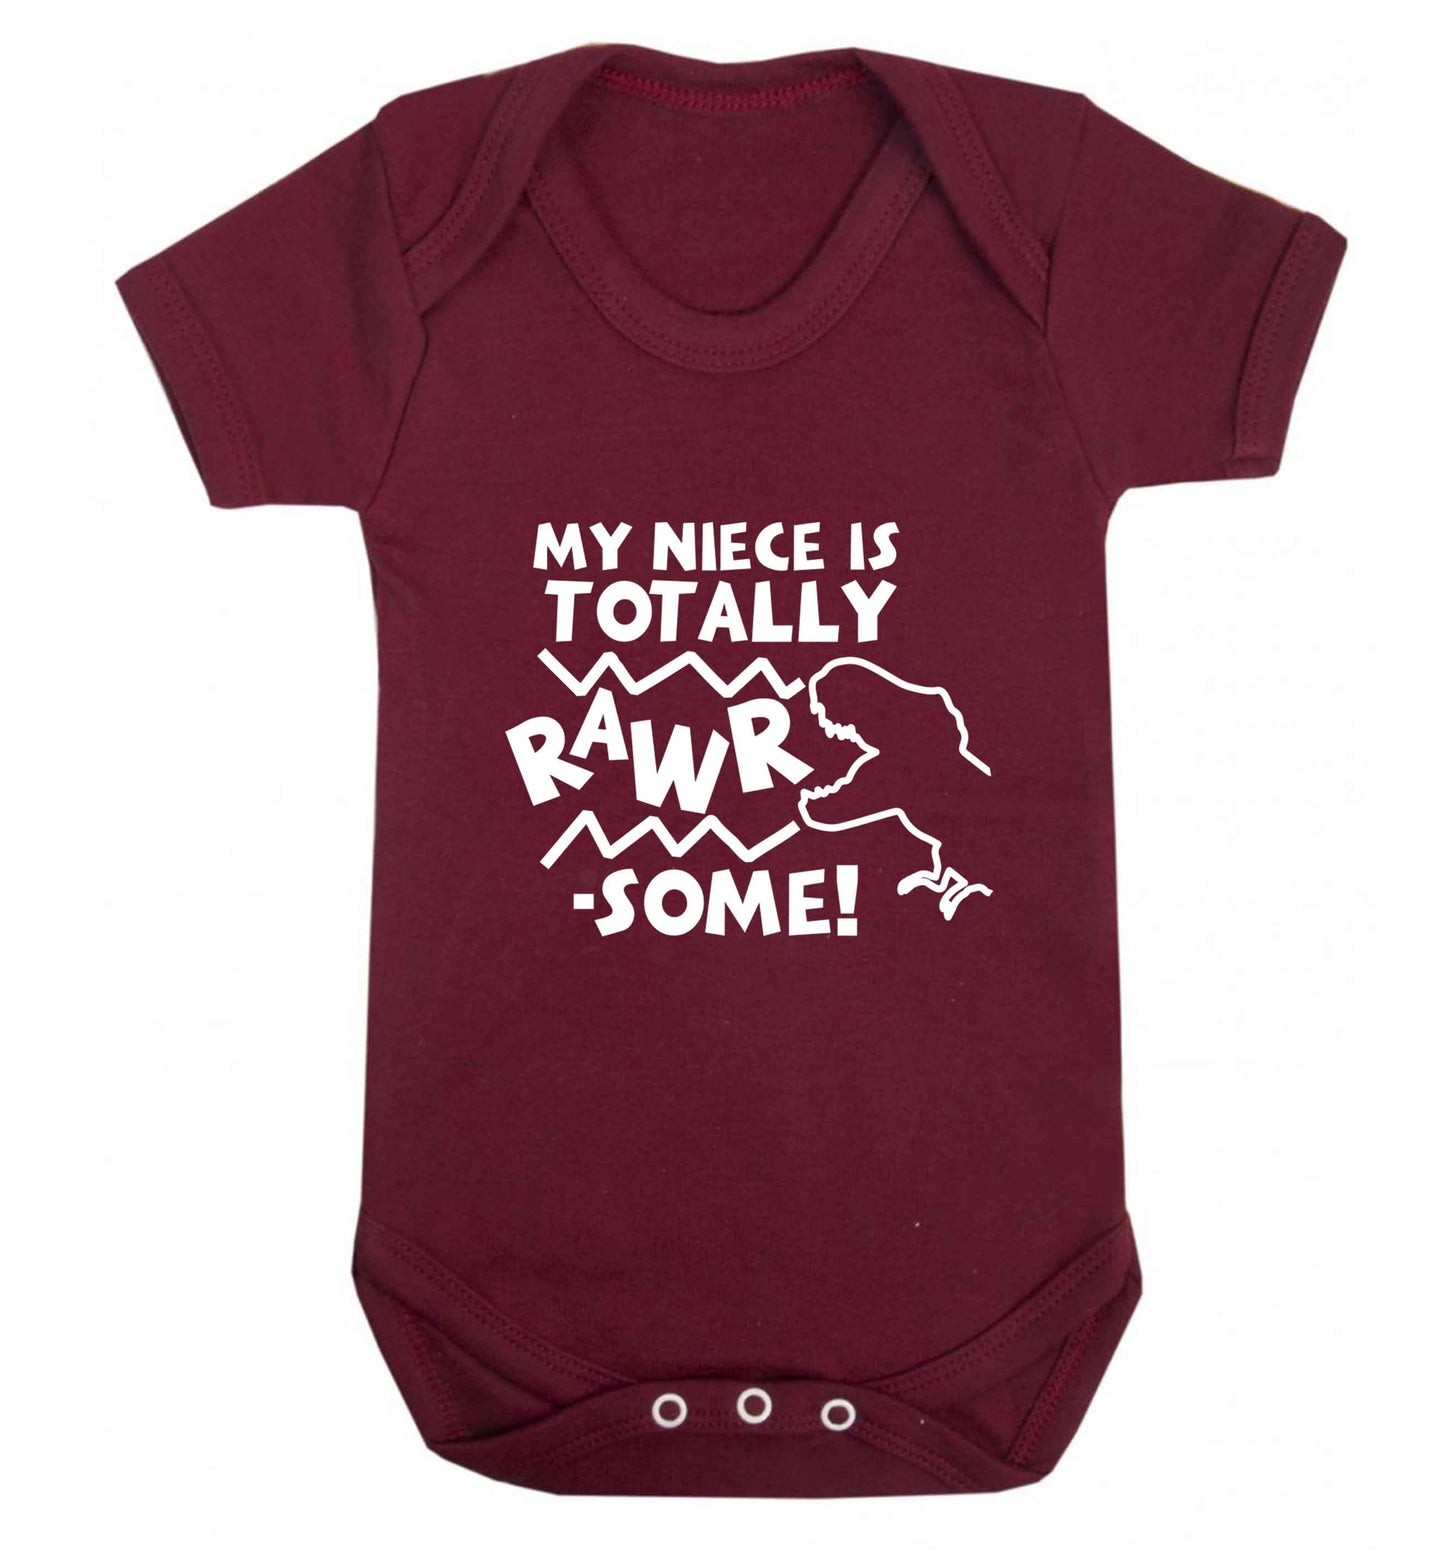 My niece is totally rawrsome baby vest maroon 18-24 months